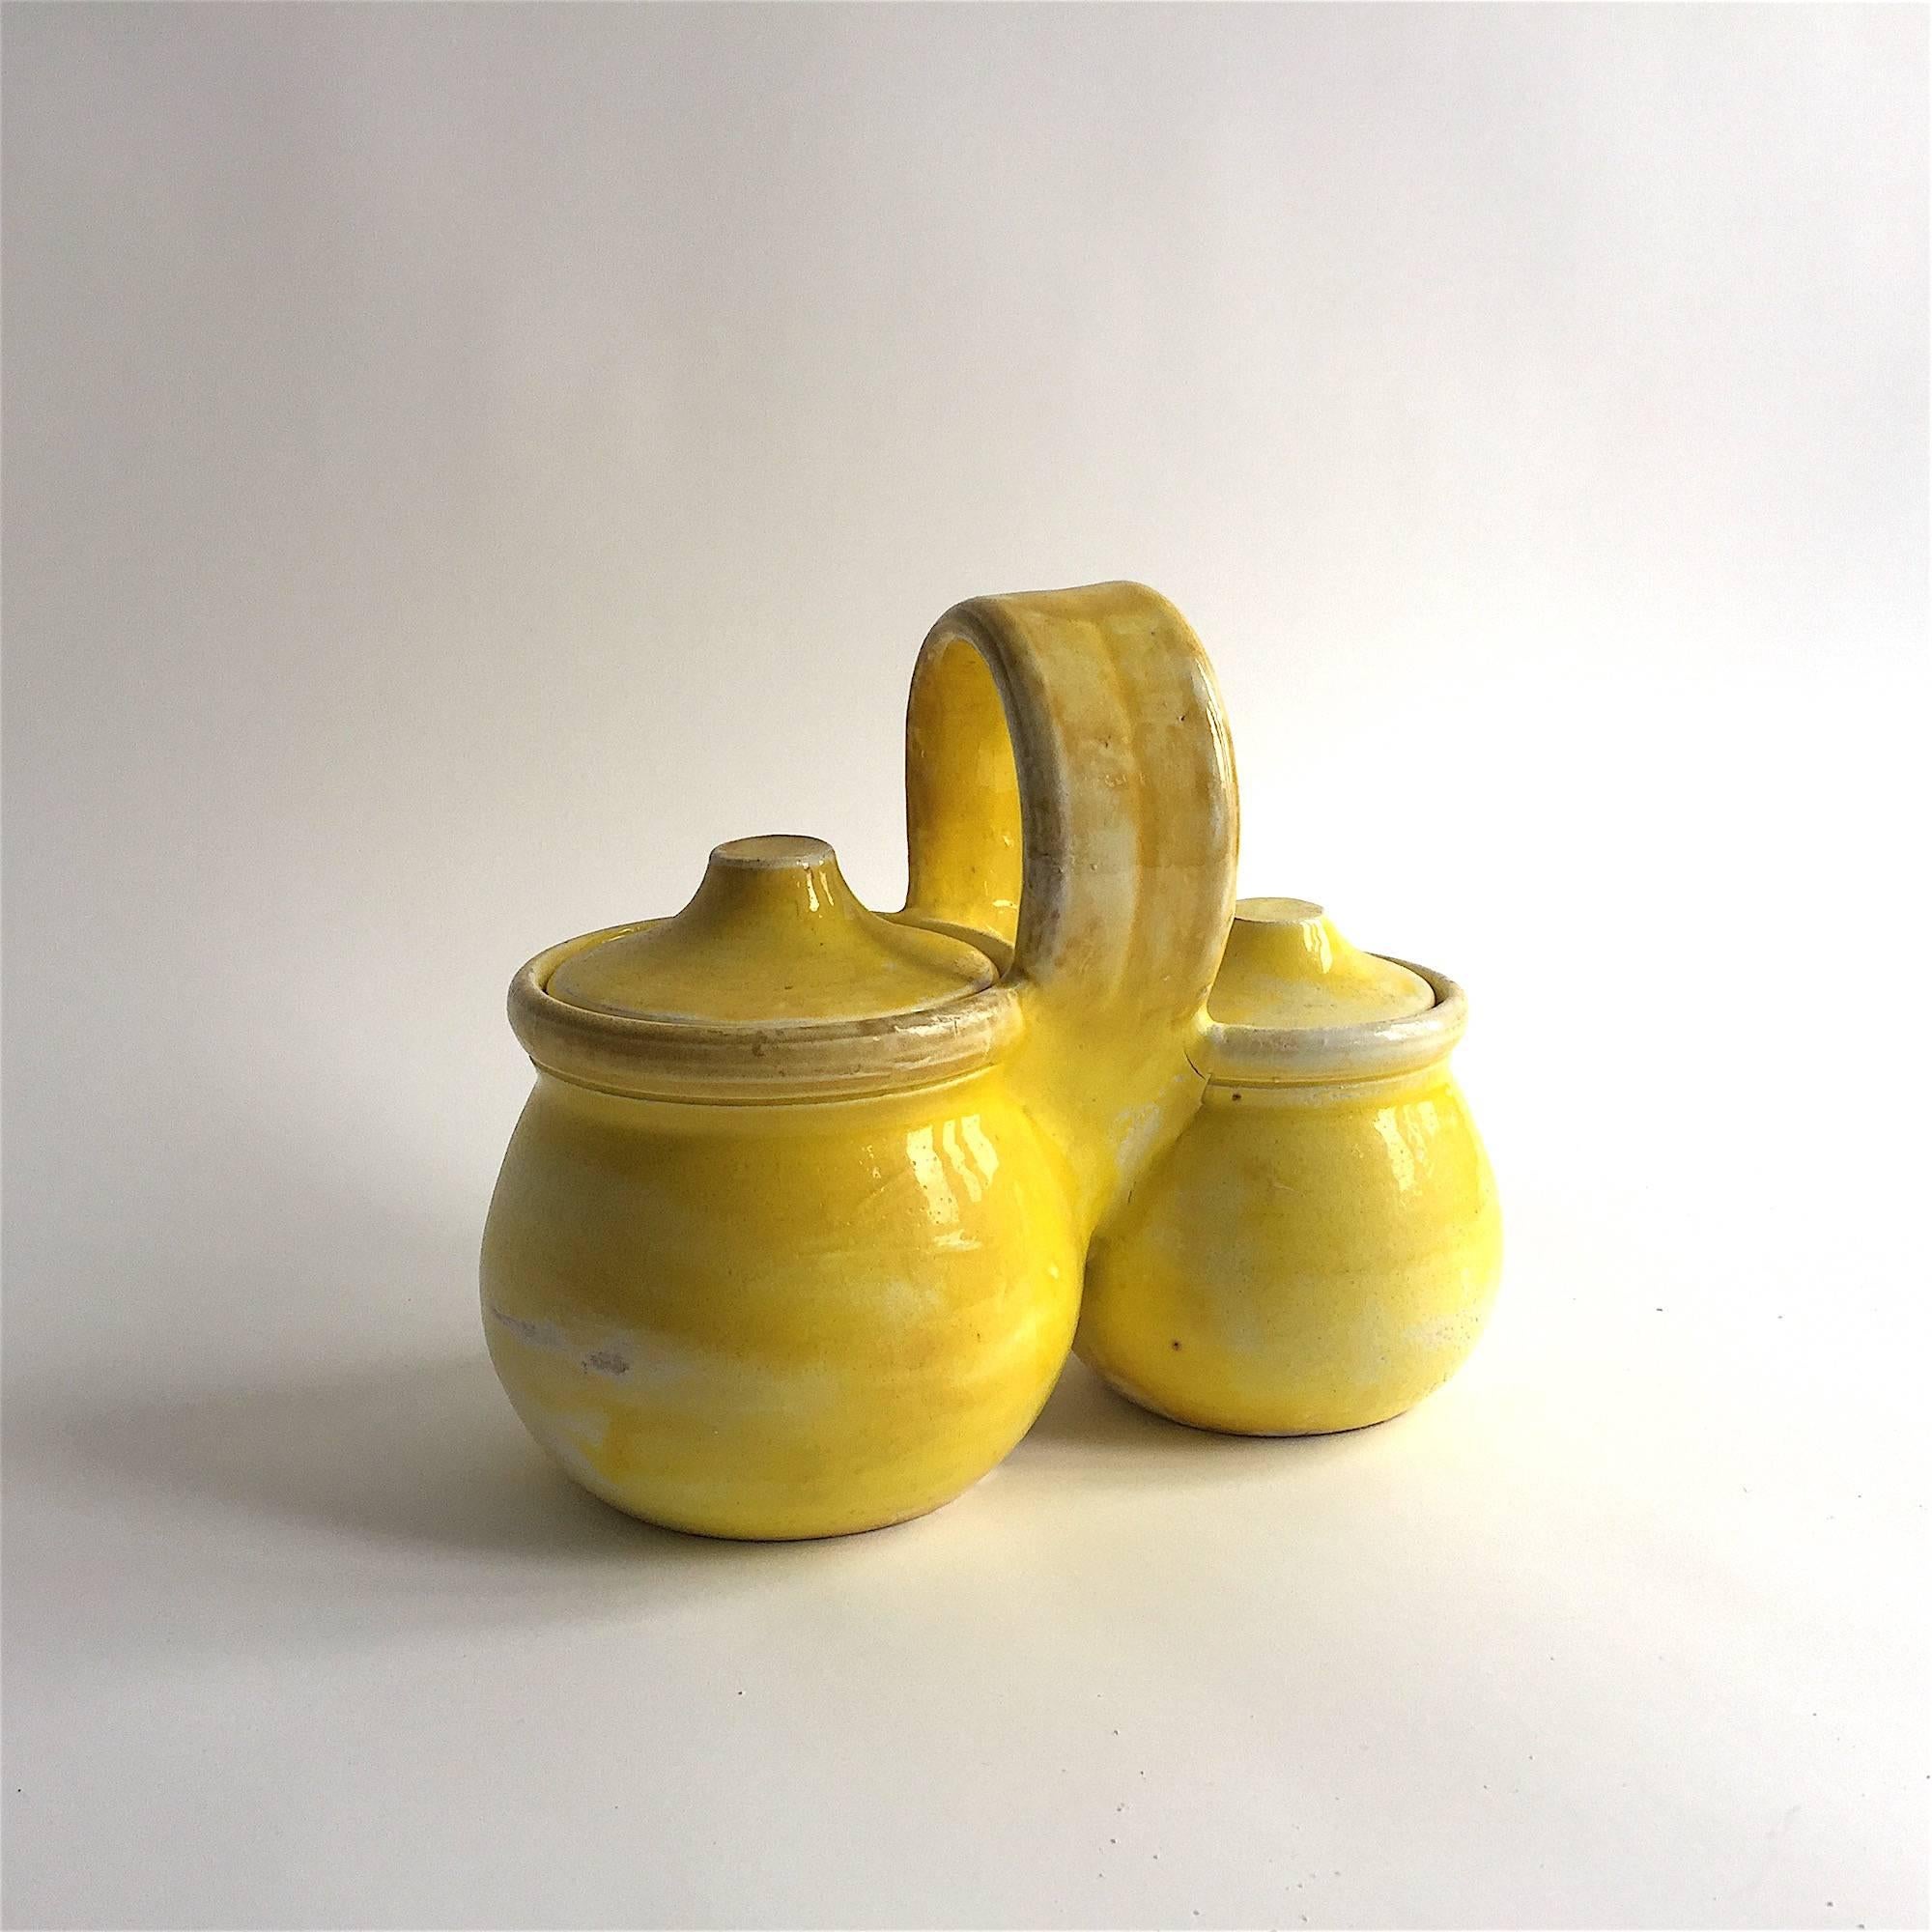 Suzanne Ramié (1907-1974.) 

France ceramic dobble pot with lids and handle by renowned France artist Suzanne Ramié having a yellow-white glaze. Vallauris Clay. Incised on the bottom with the artist's 